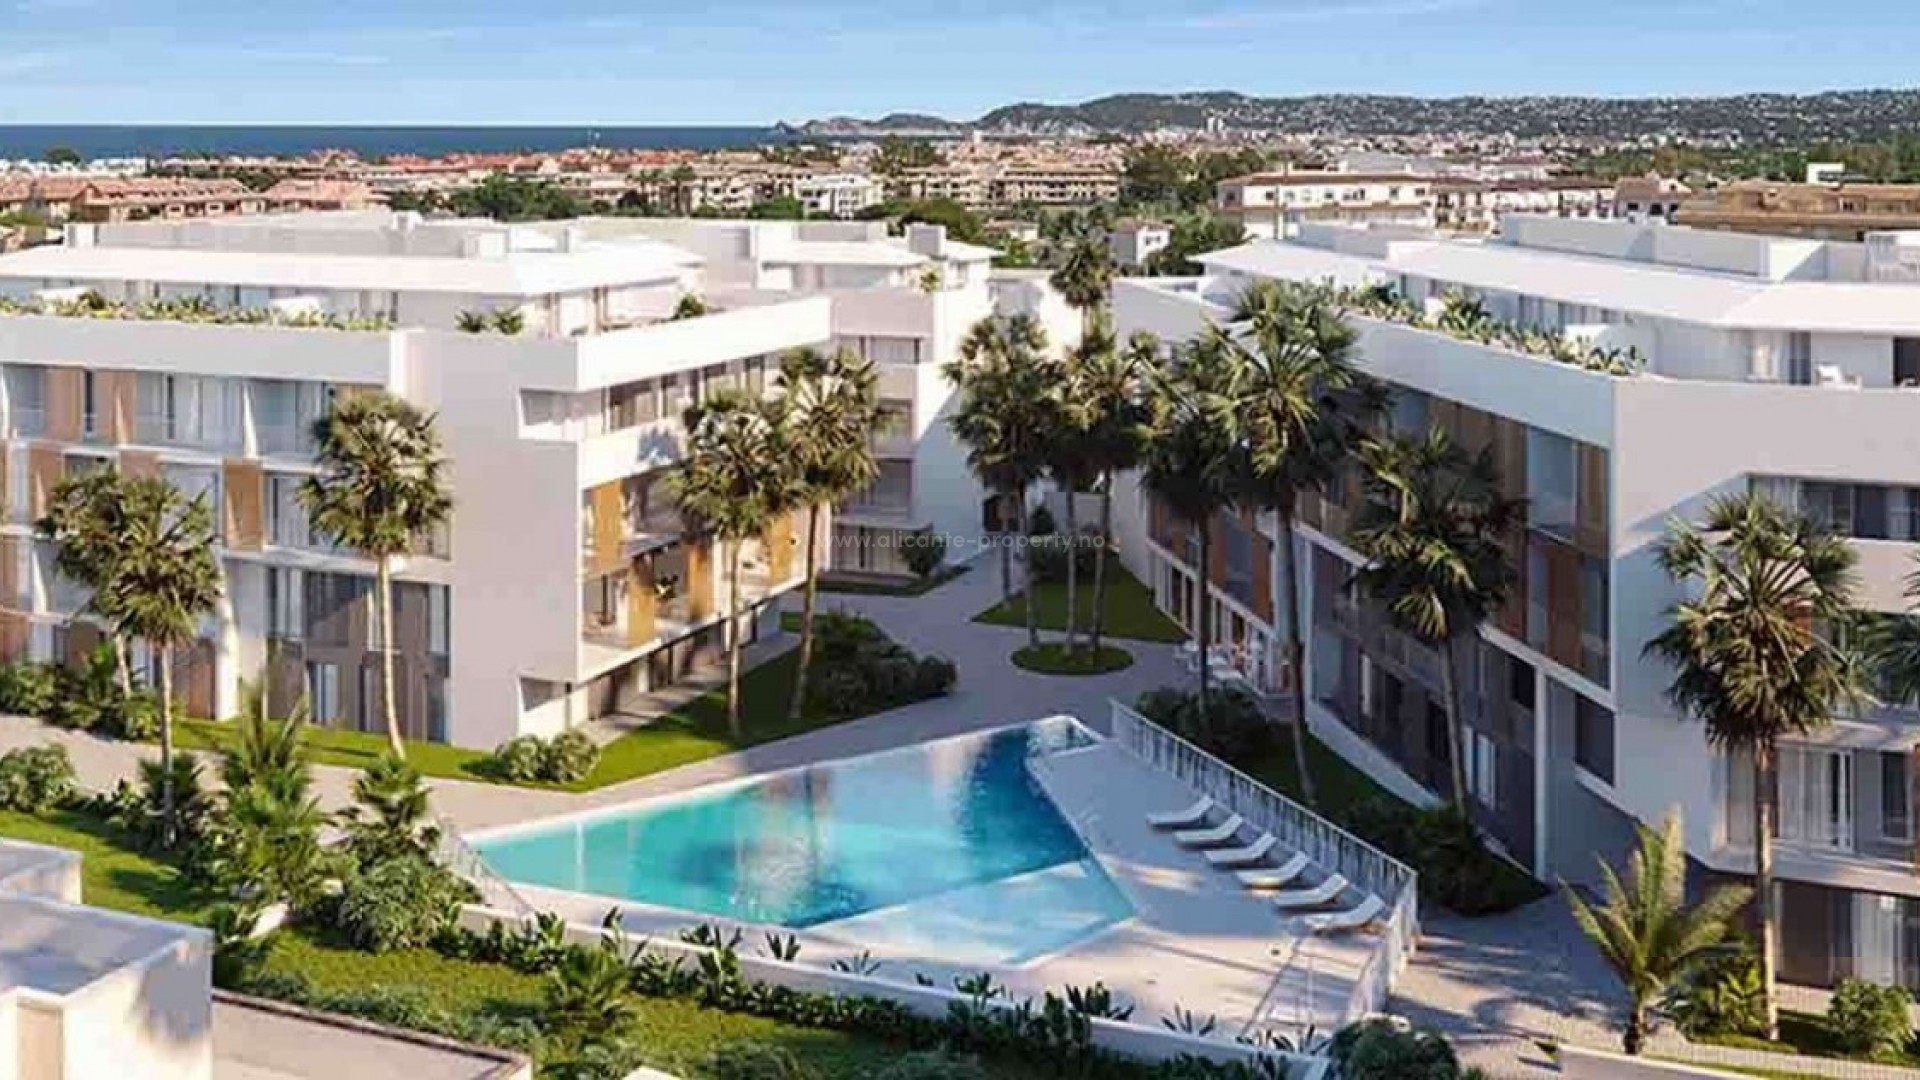 New flats/apartments in Javea 5 min from the beach, the harbor and the centre, 2/3/4 bedrooms, 2 bathrooms. The apartment complex has a swimming pool and social club.